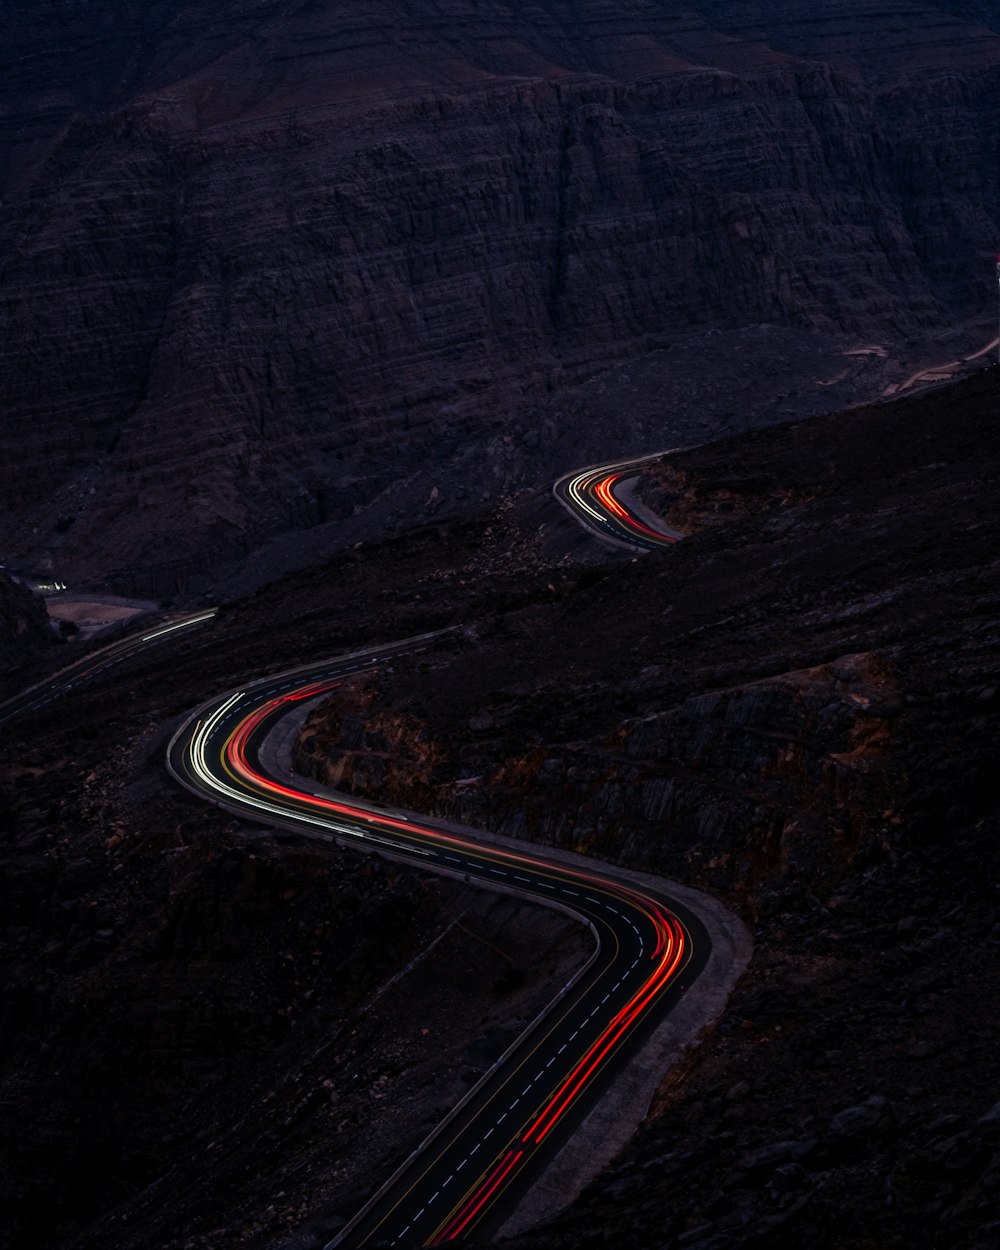 a winding road in the mountains at night